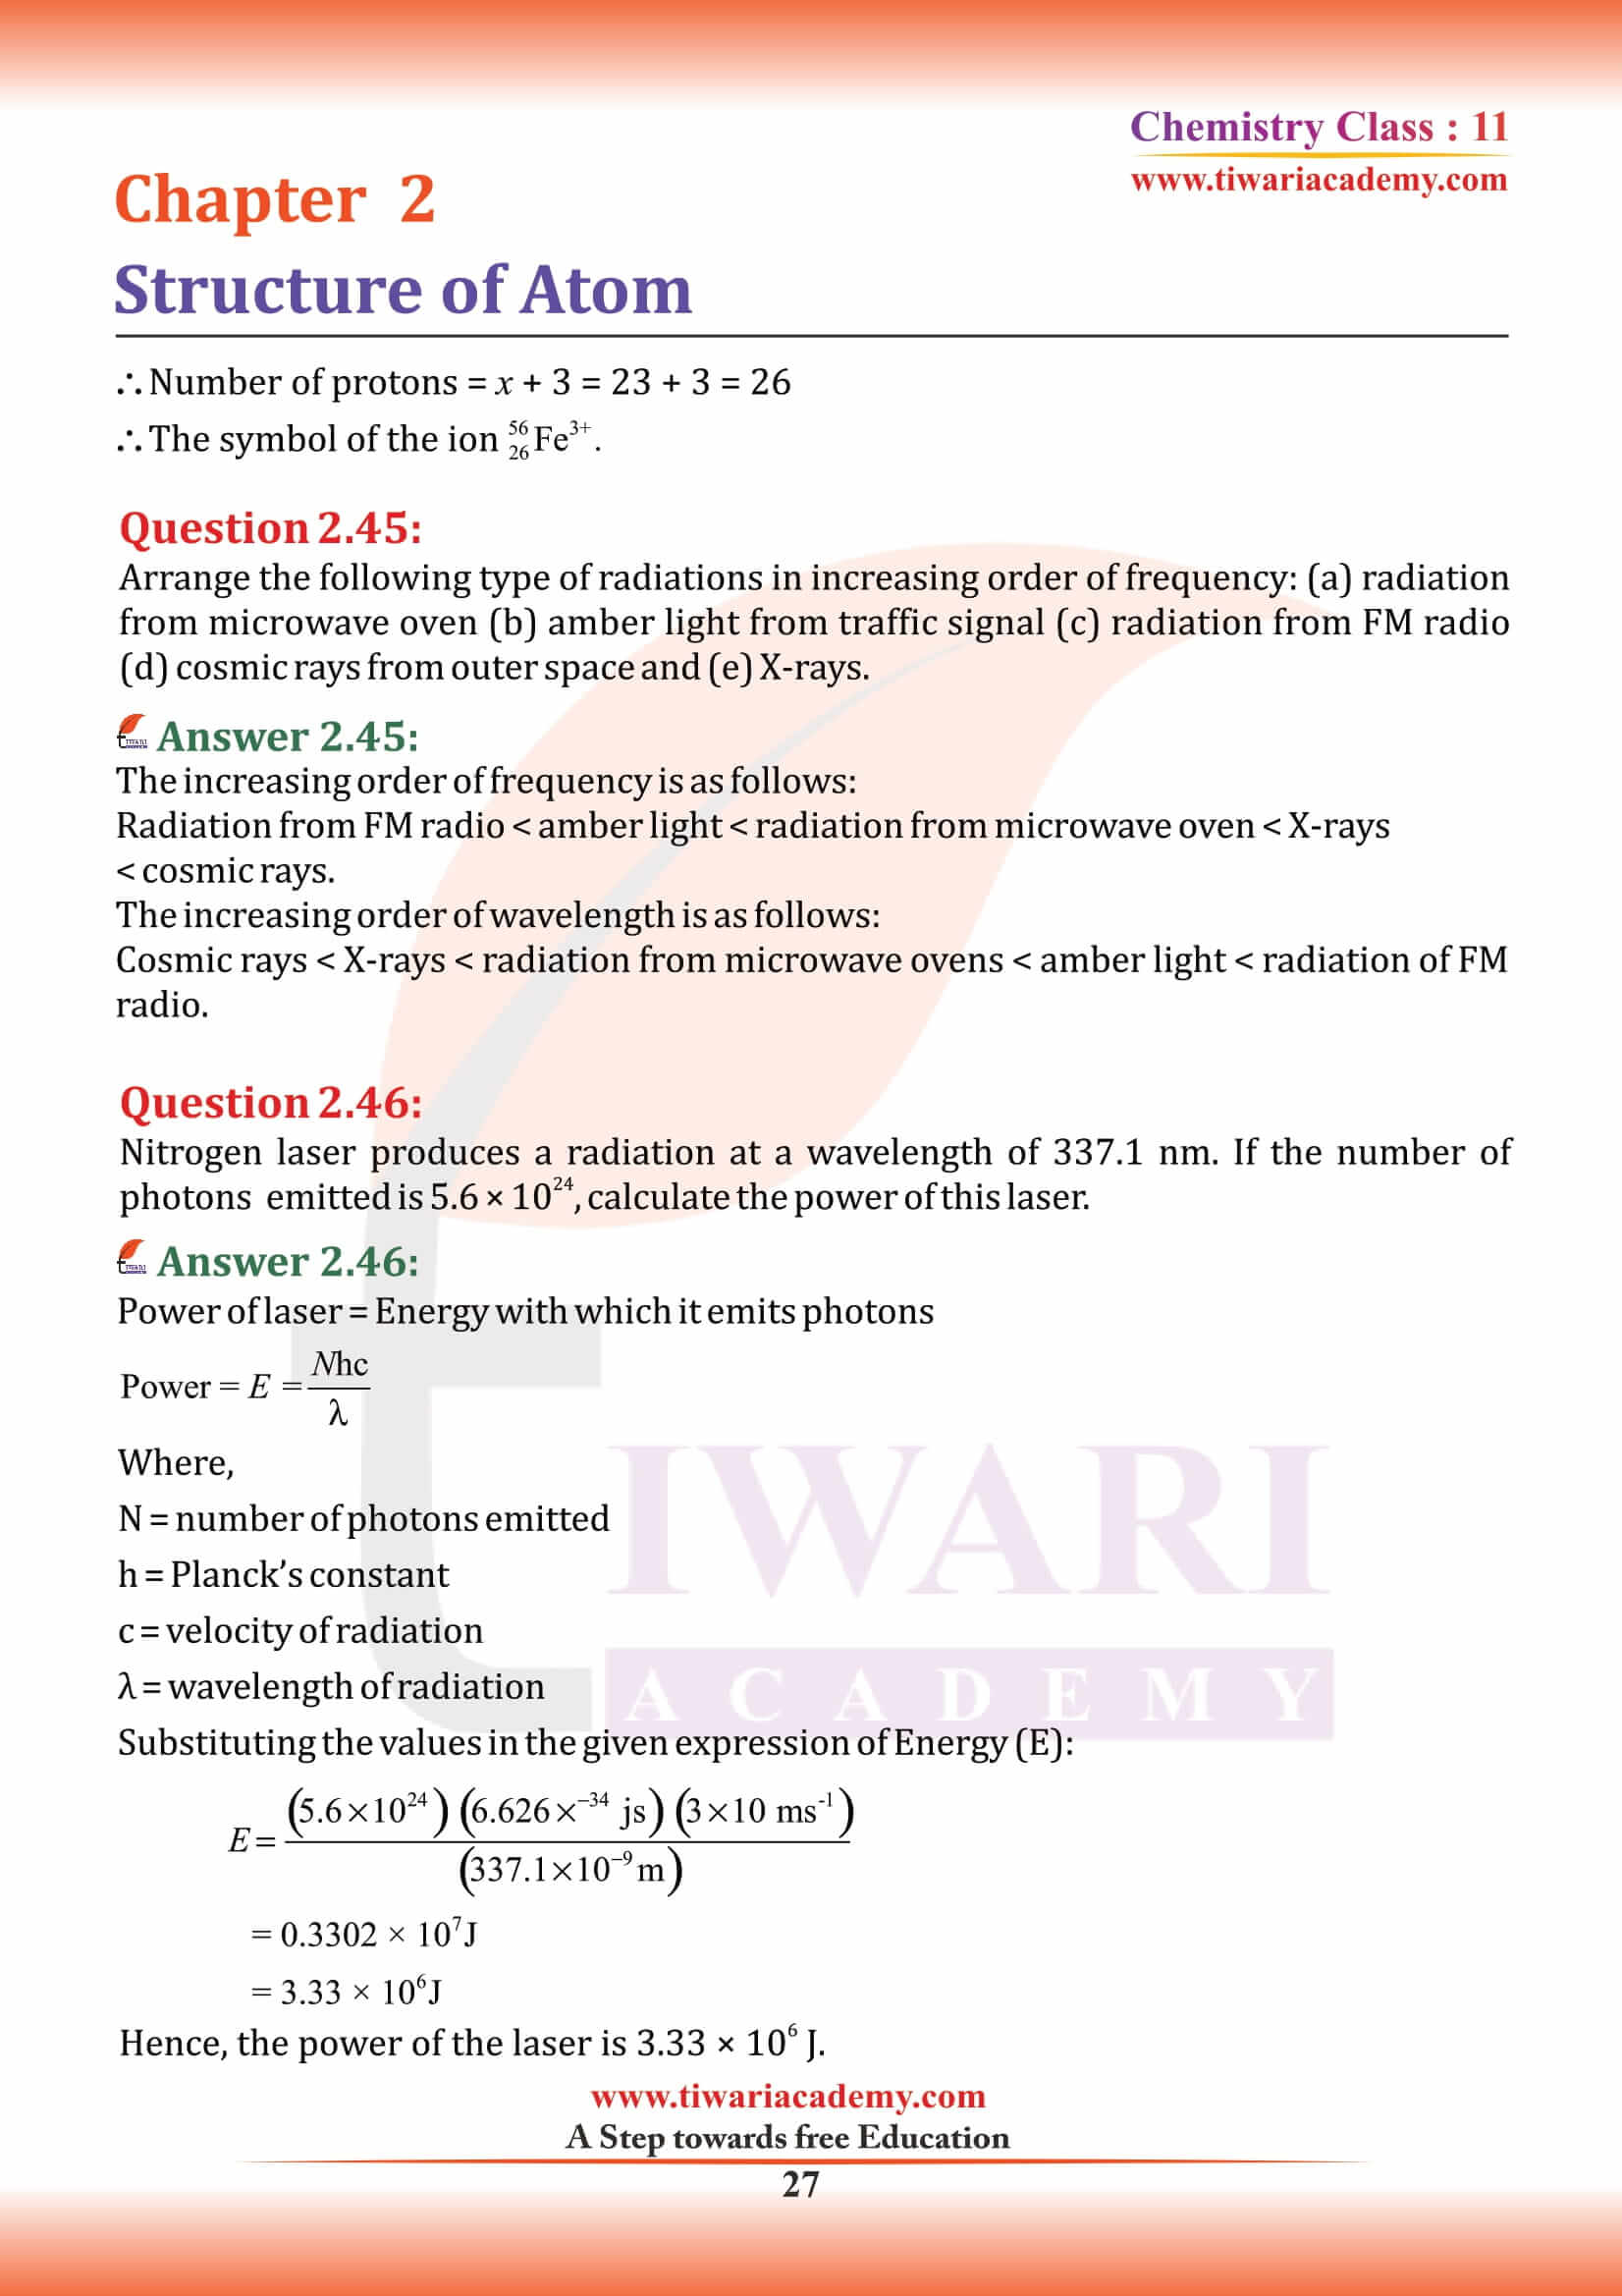 Class 11 Chemistry Chapter 2 Multiple choice questions